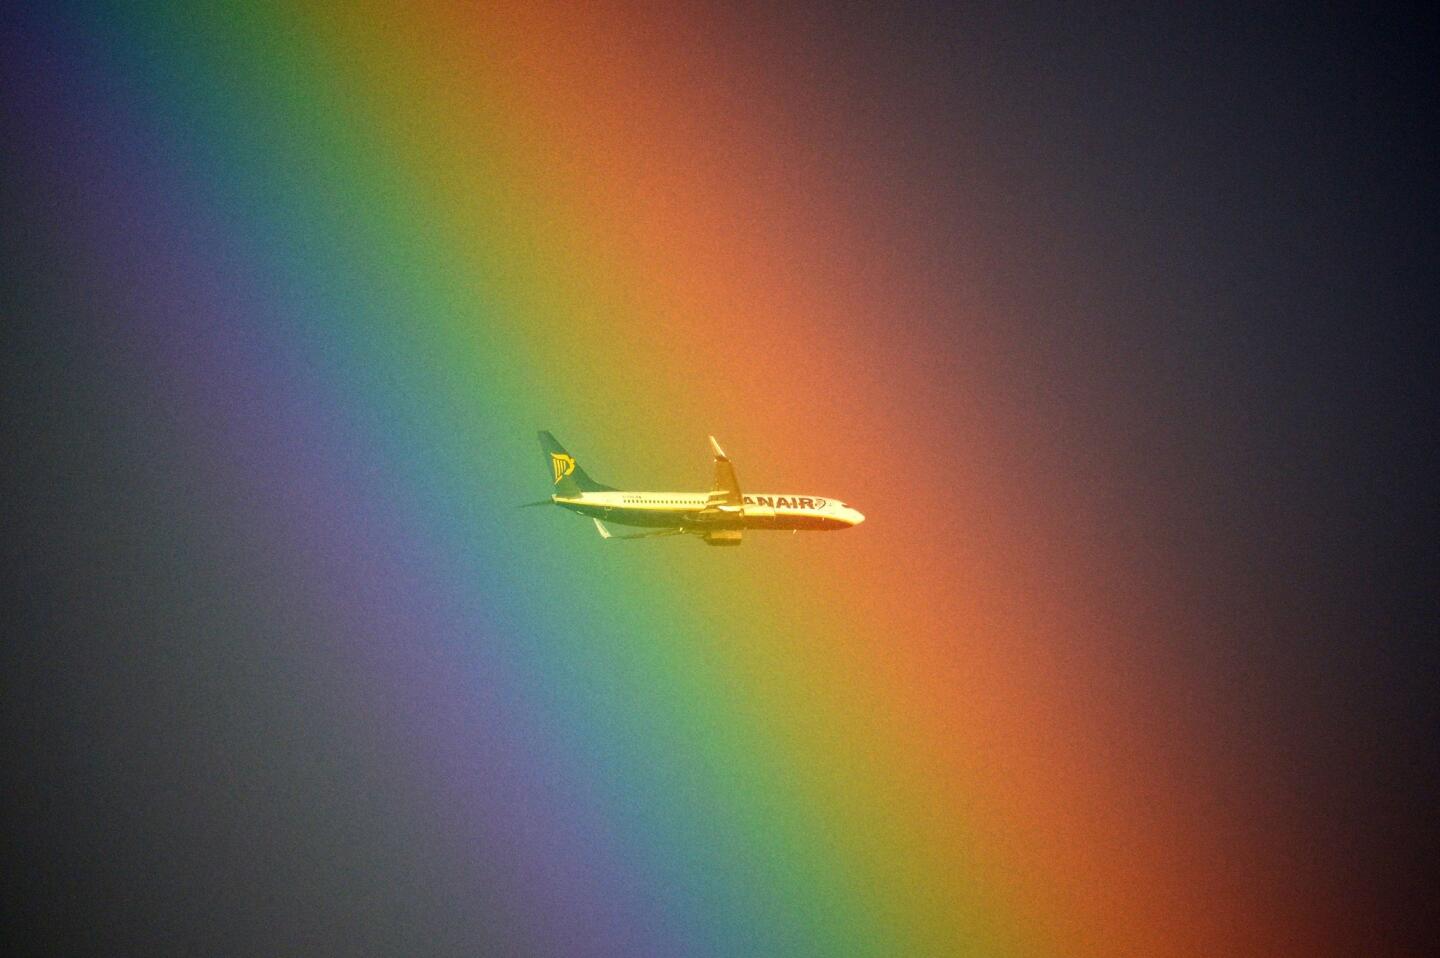 A Ryanair plane flies in front of a rainbow over Rome.